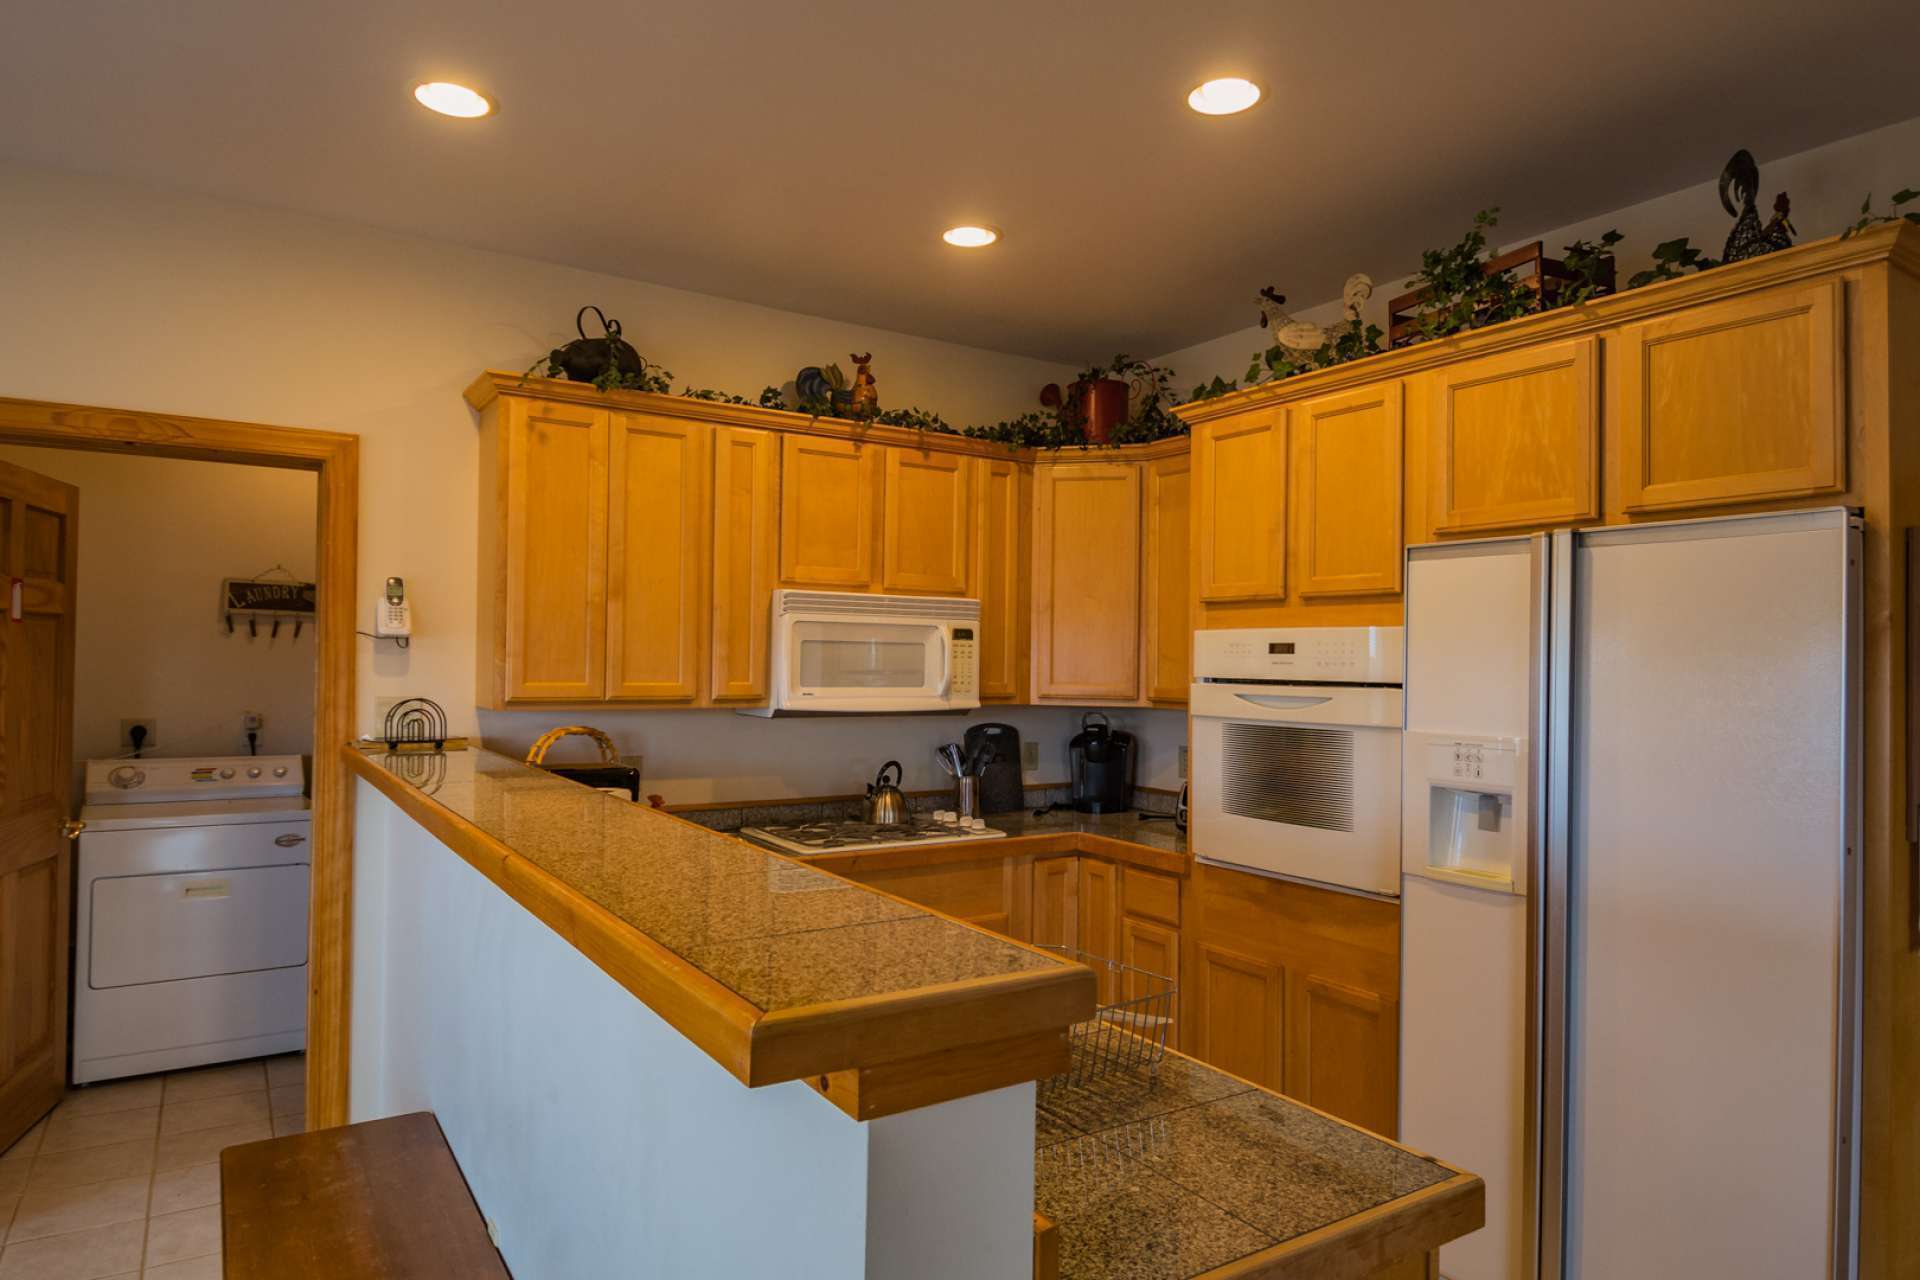 The galley-style kitchen is well equipped with plenty work and storage space.